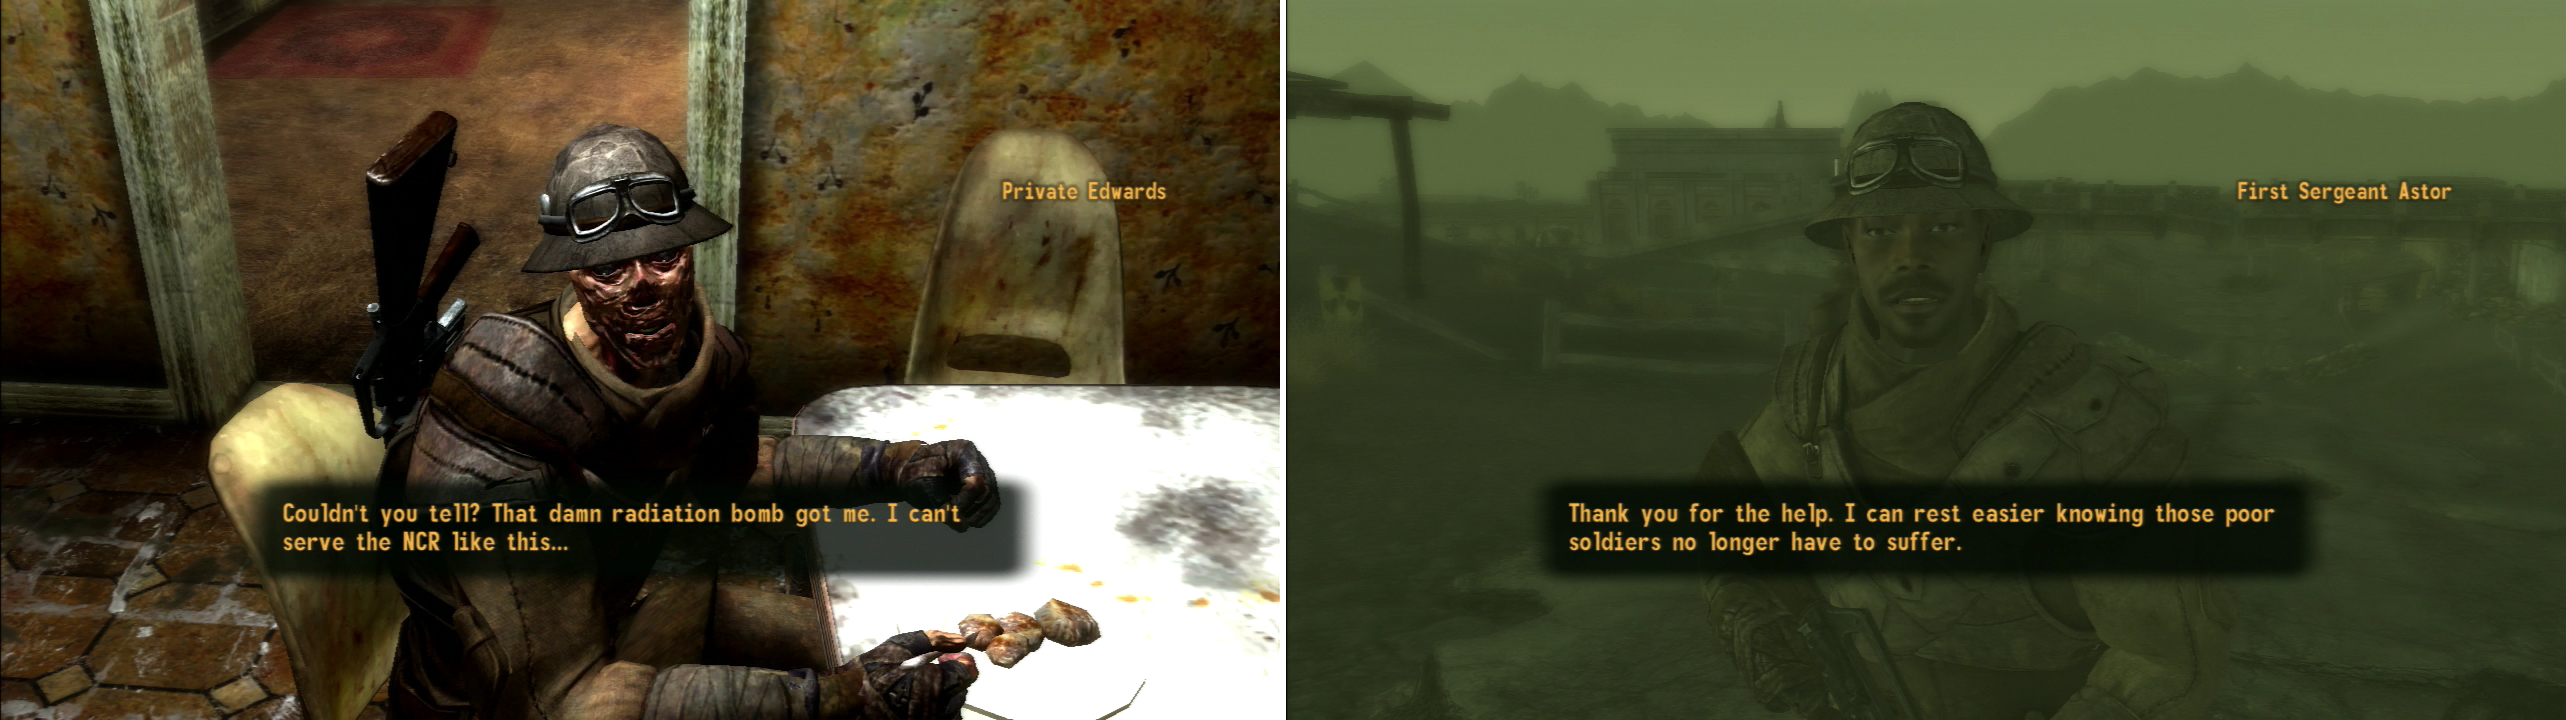 Poor Private Edwards survived the radiation bomb with his life and his sanity, but he’ll never be human again (left). After you’ve recovered the NCR Dogtags, return to Sergeant Astor for a reward (right).